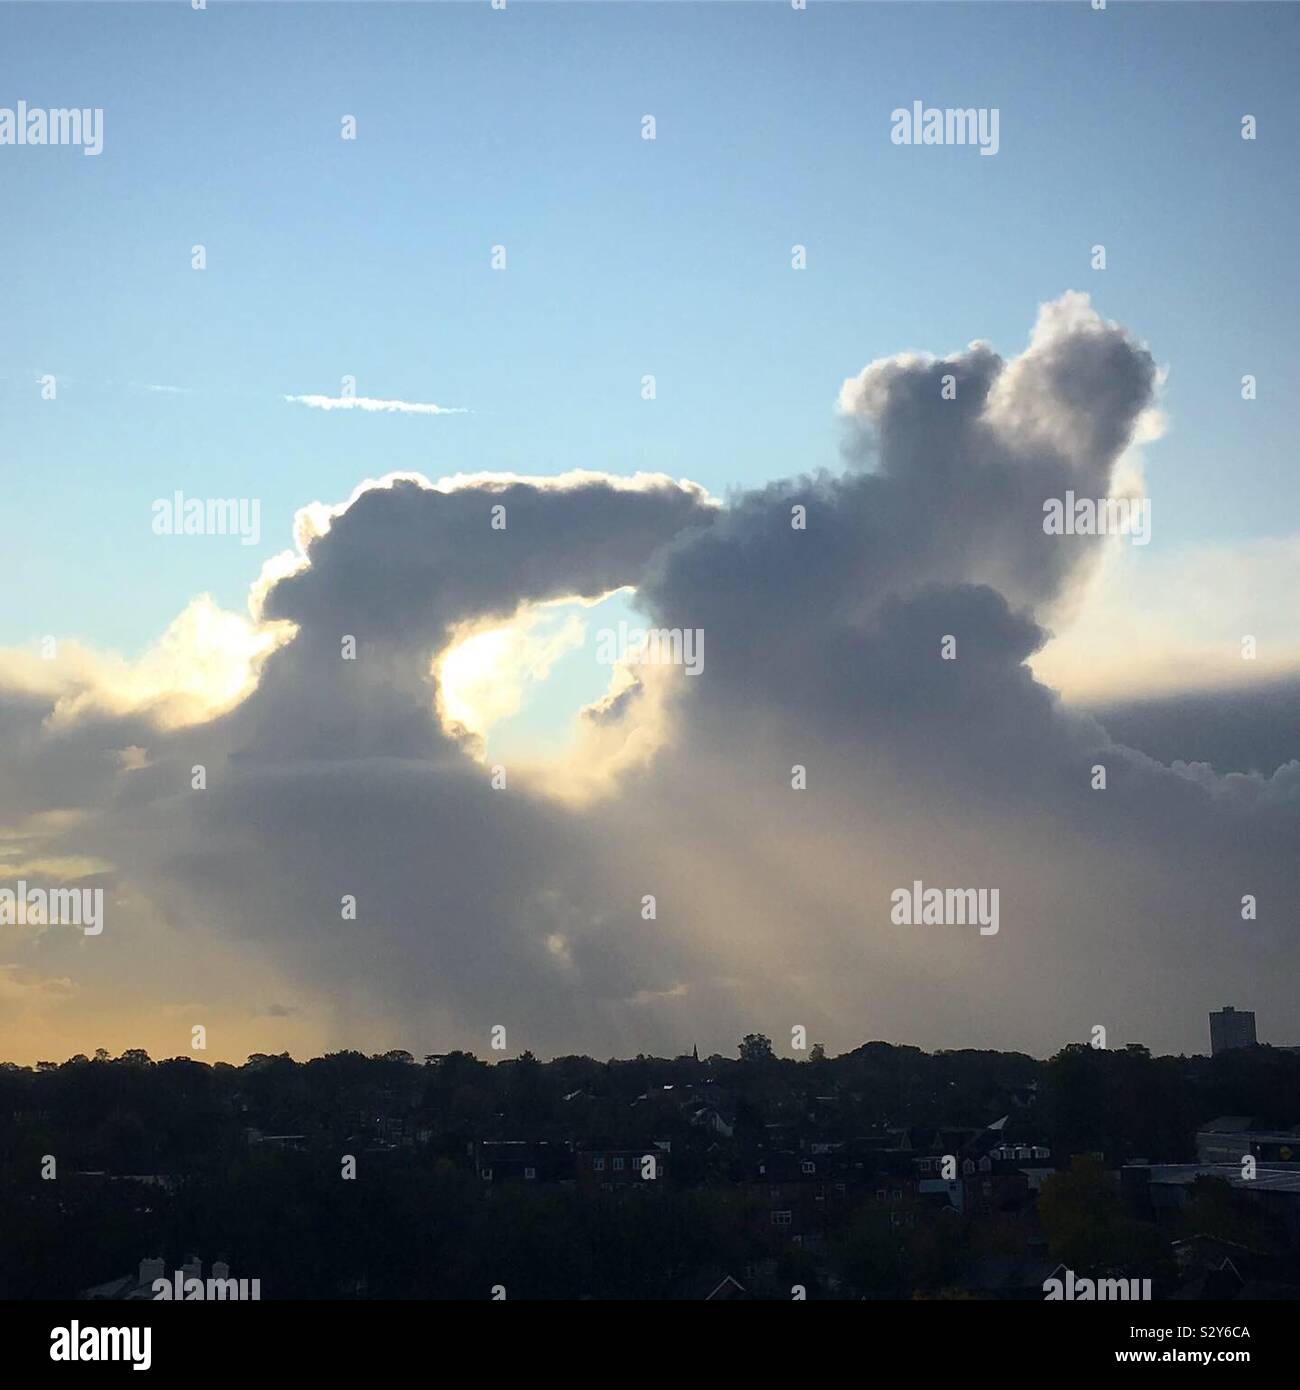 Weird clouds over Southampton. What do you see? Stock Photo